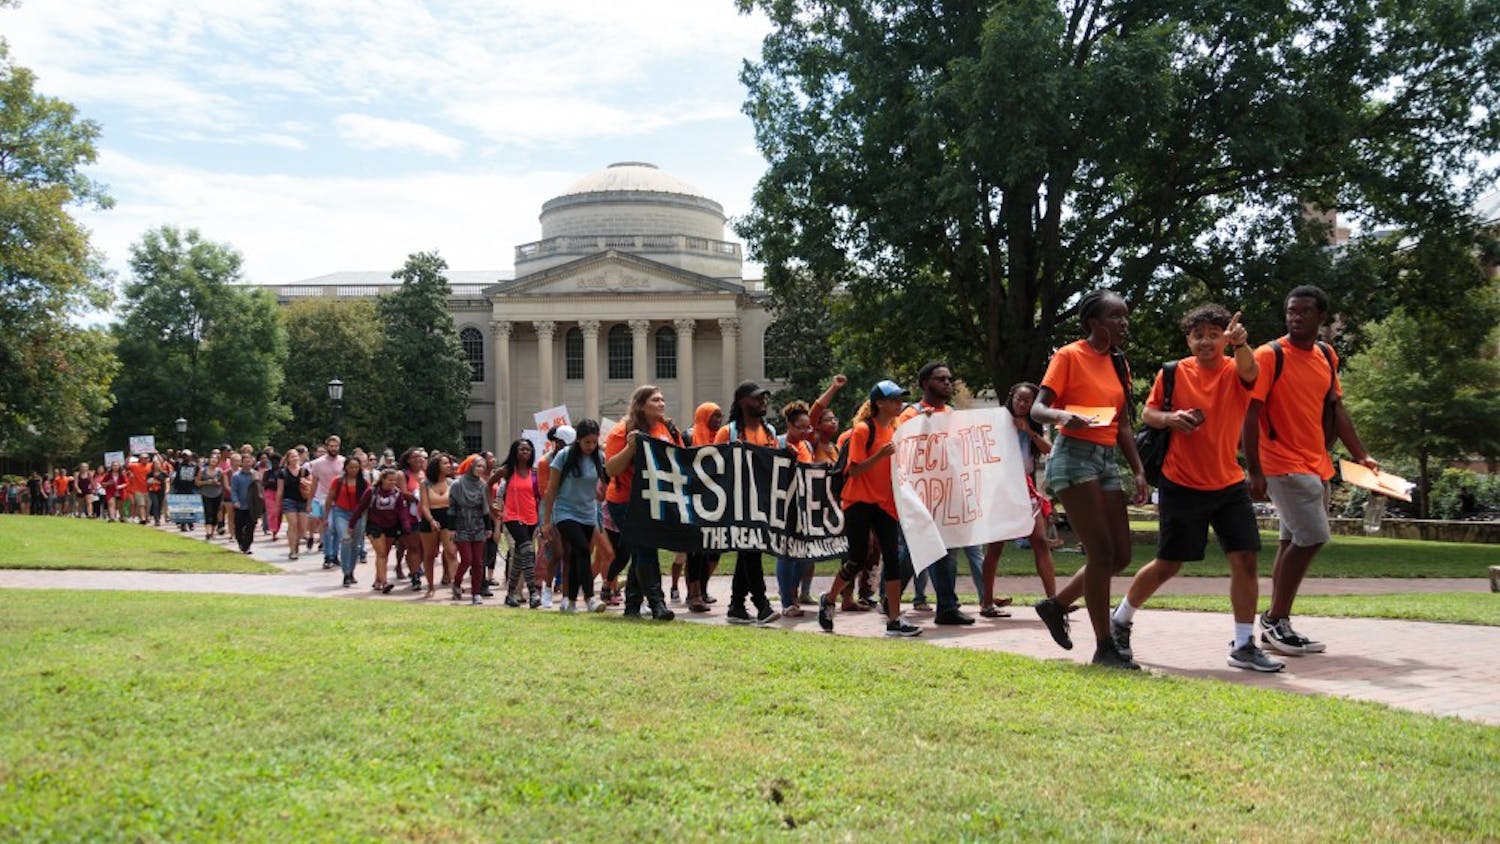 After rallying against the shut down of the UNC Center for Civil Rights, protesters march to Silent Sam to show solidarity with the sit-in.